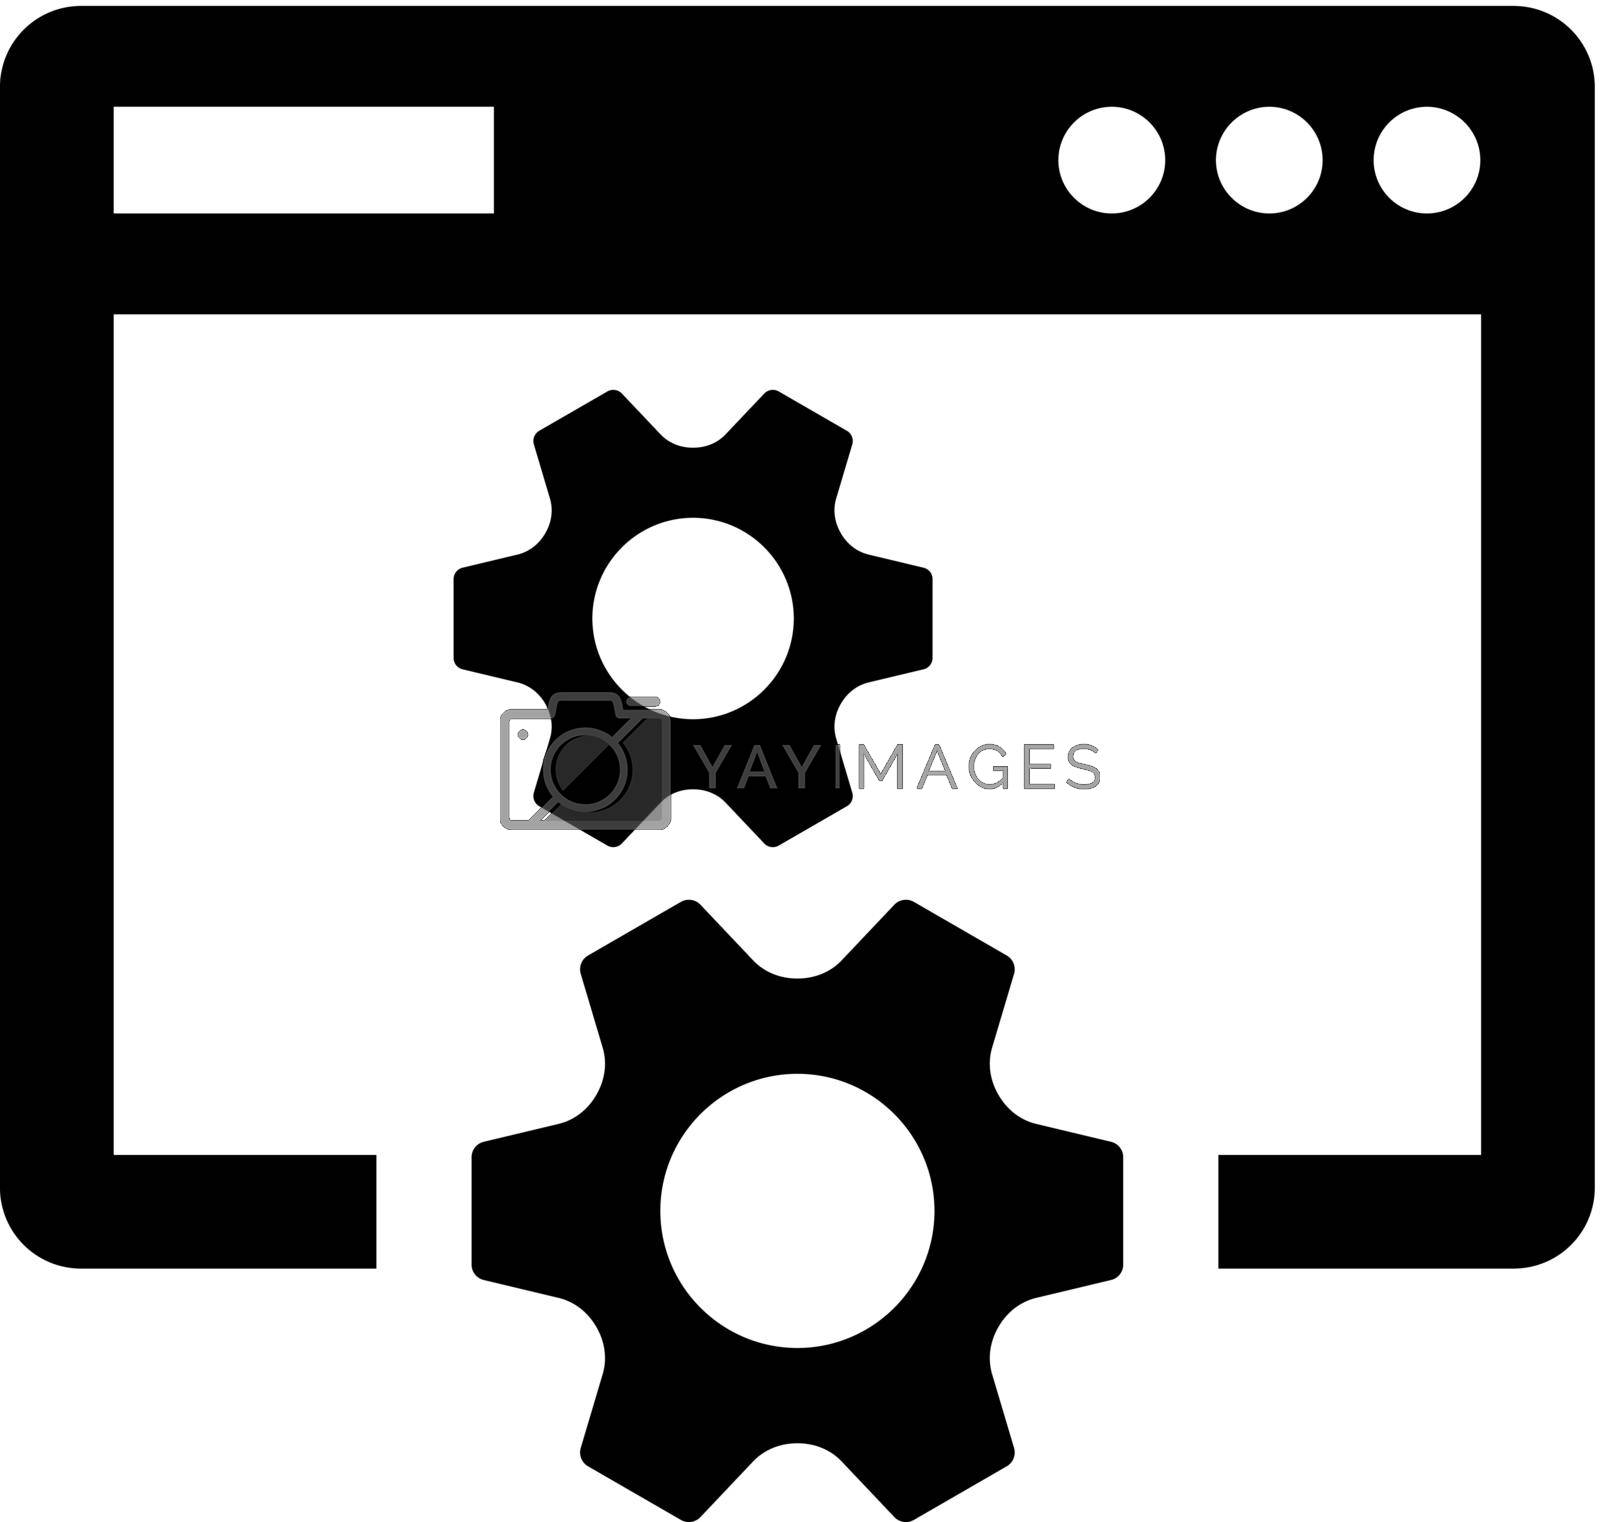 Royalty free image of Web optimization icon by delwar018